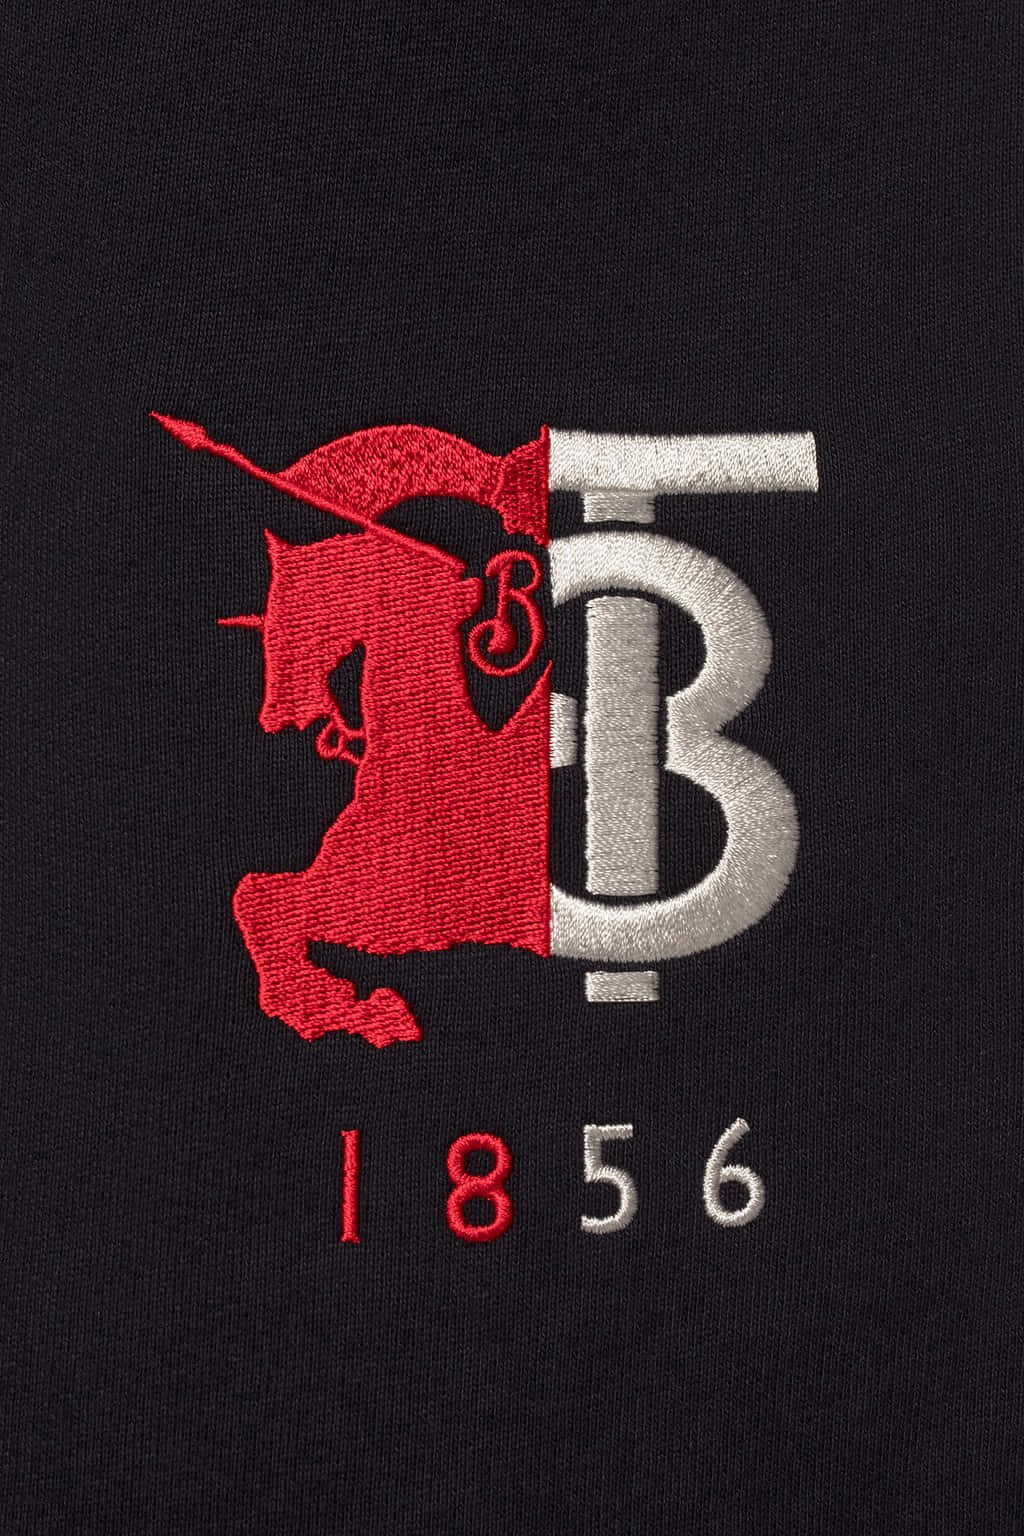 a black t - shirt with a red and white logo